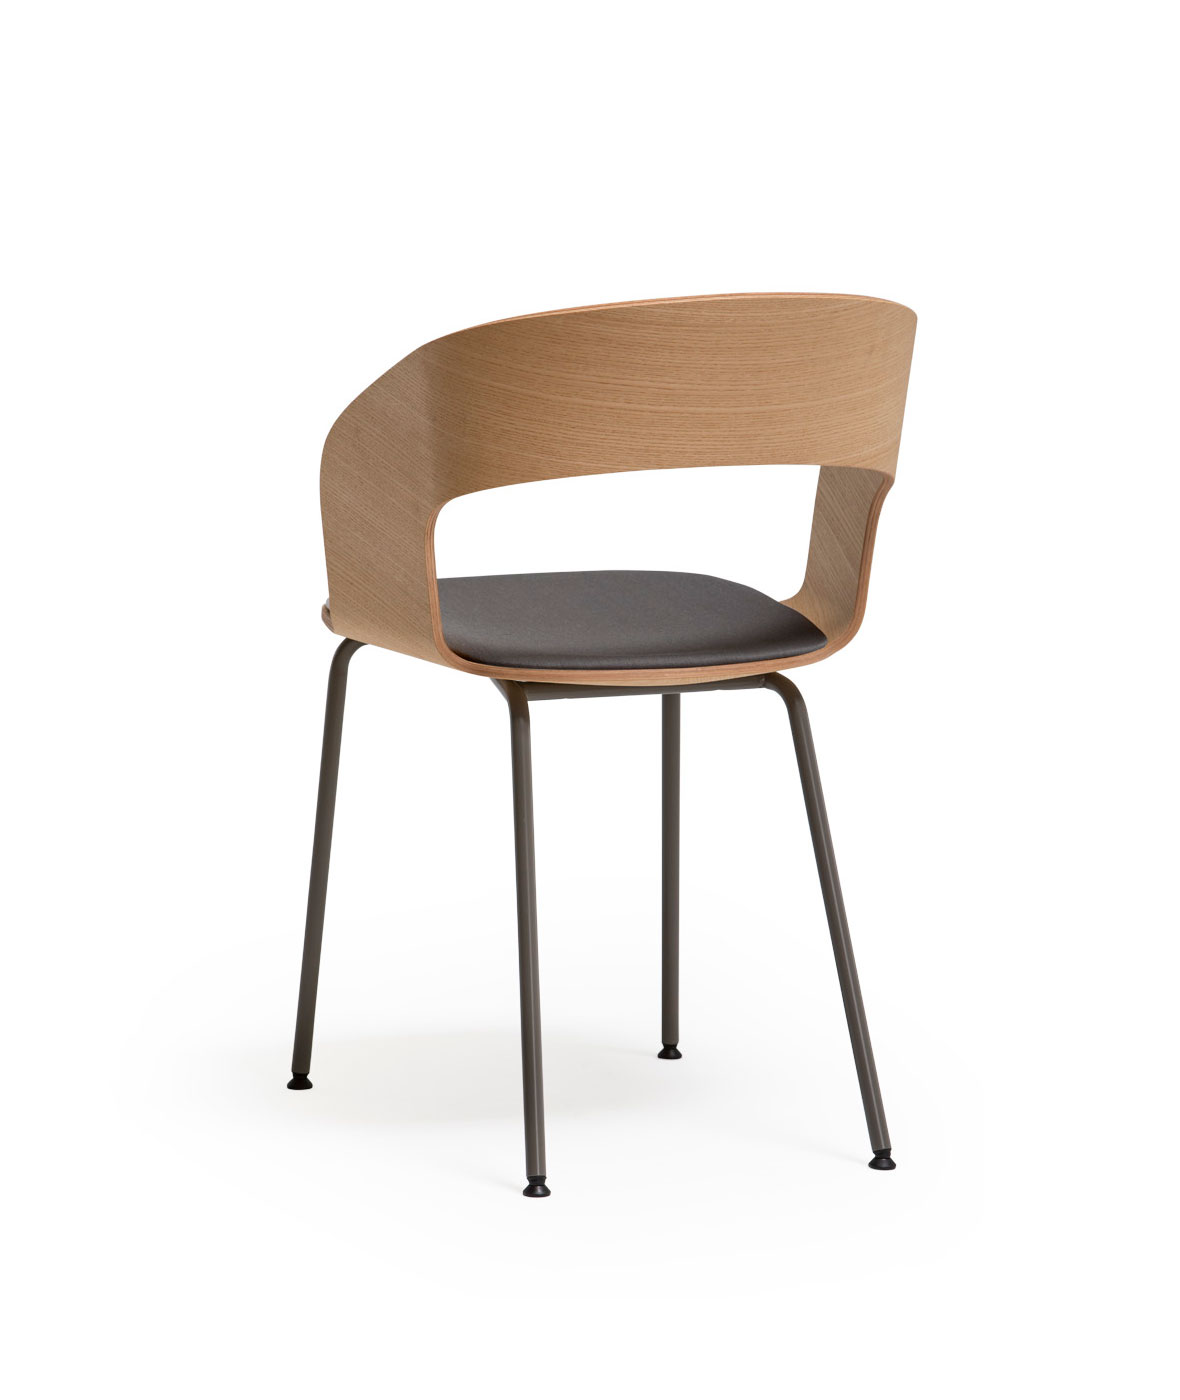 Goose chair Model B with armrests and metallic legs - Vergés